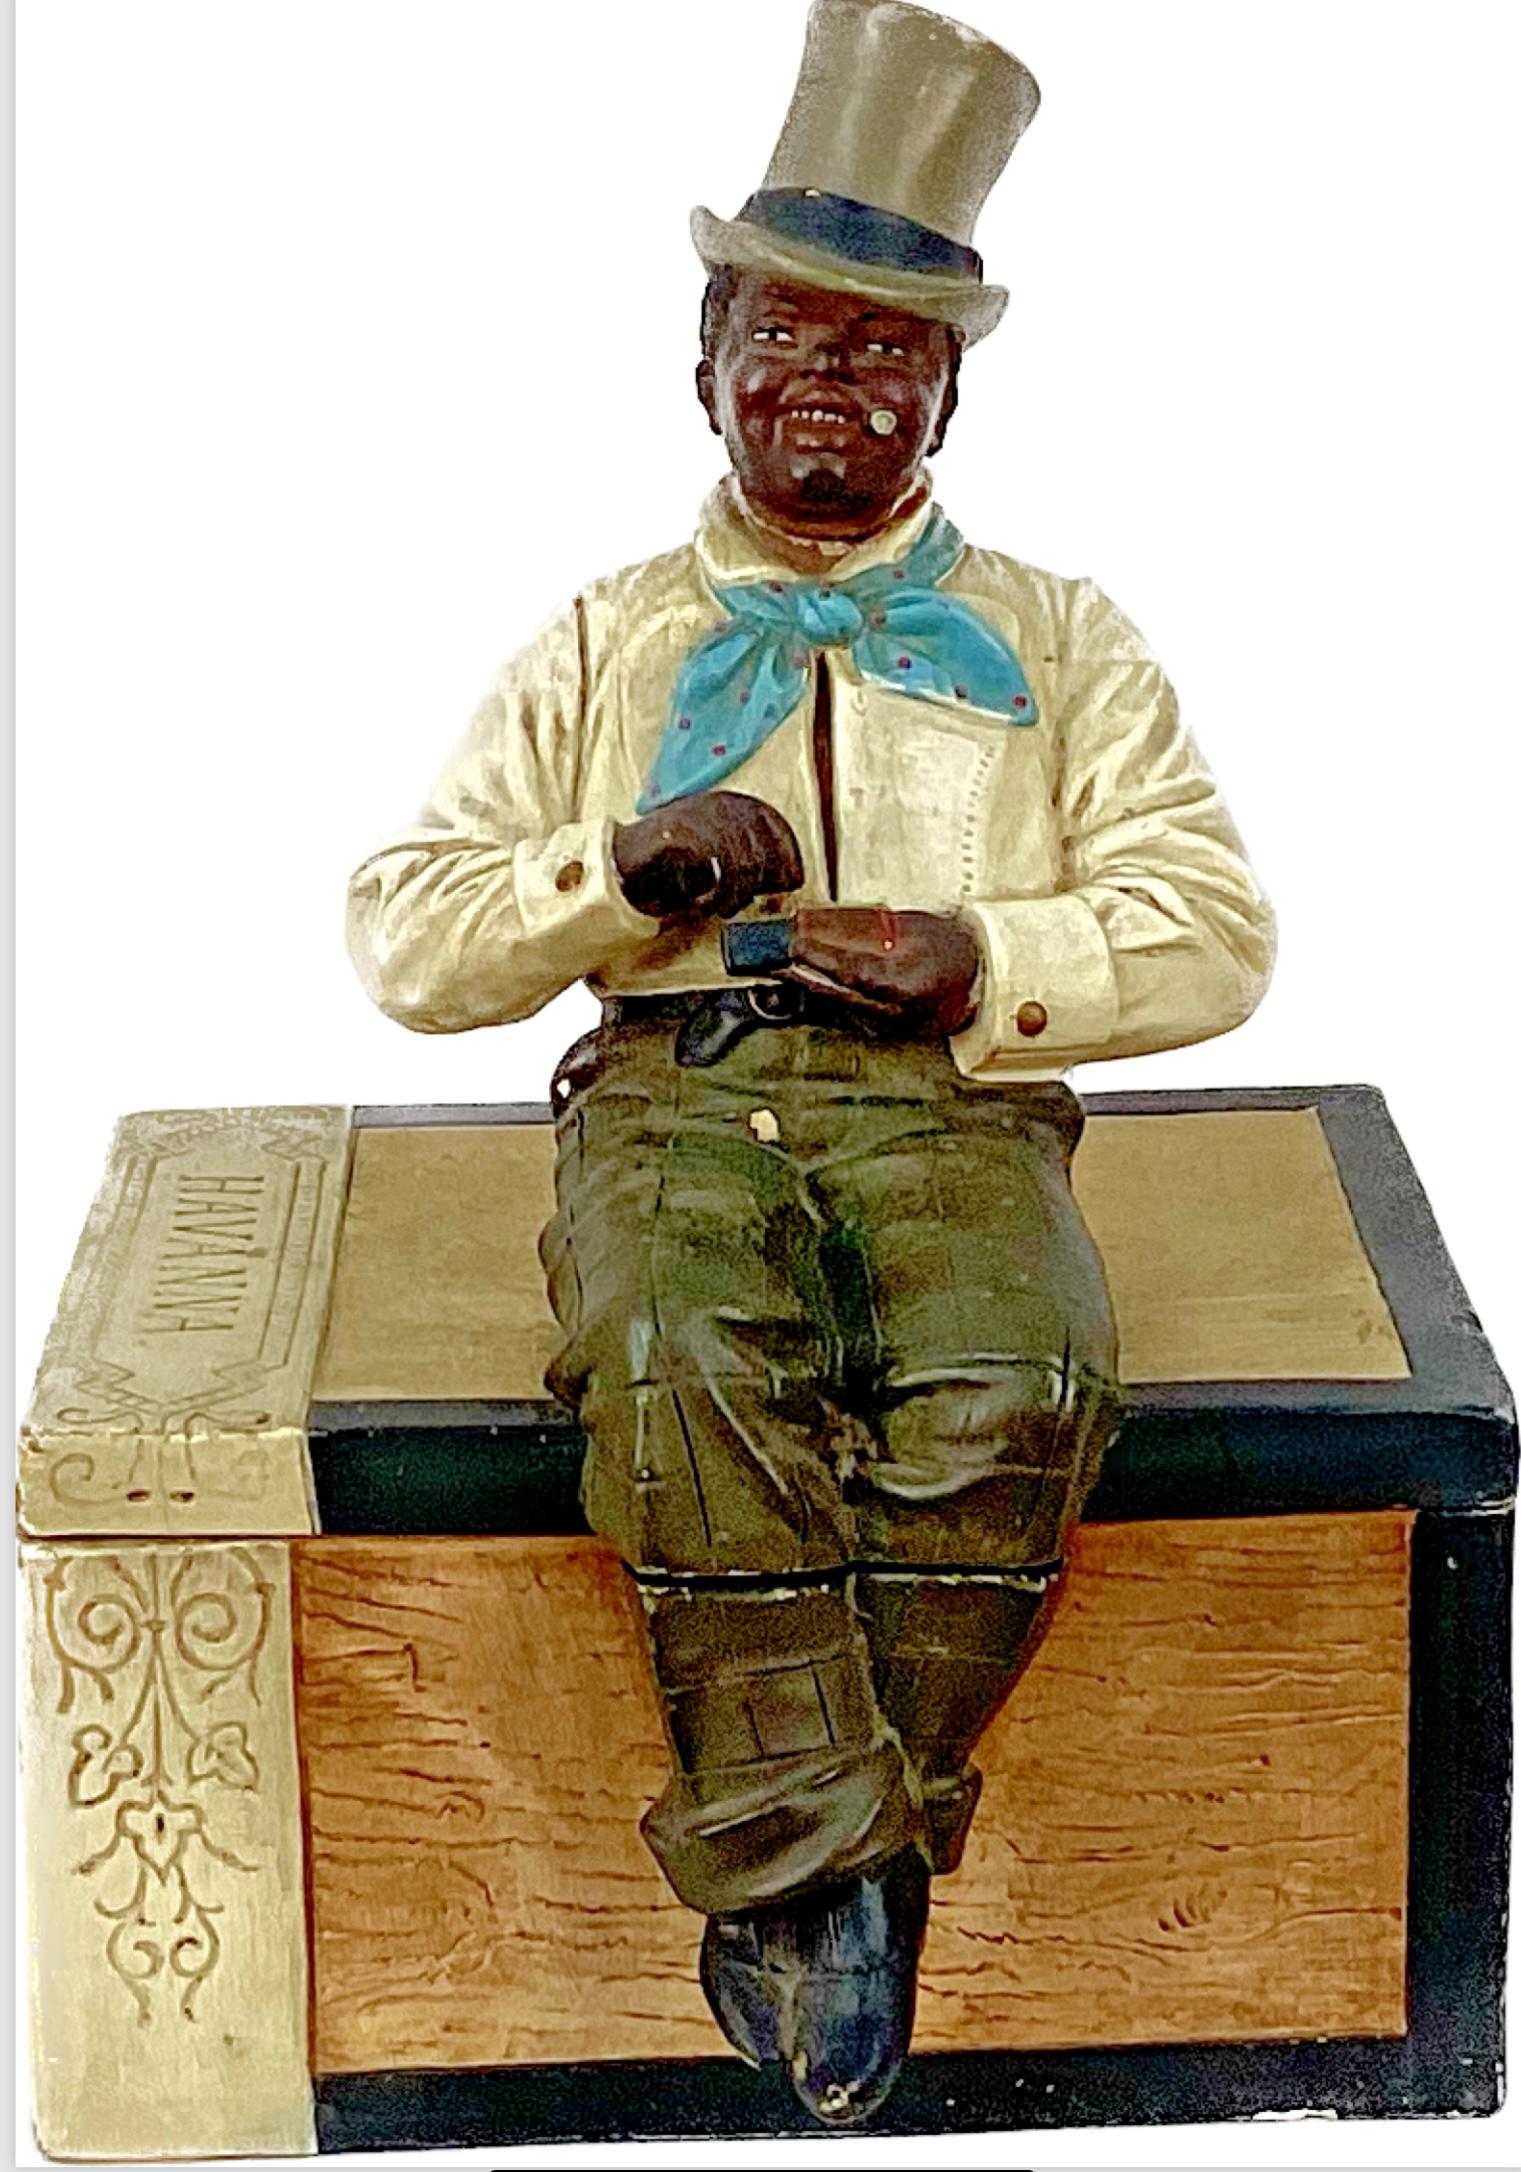 Black Man Ceramic Cigar Jar. Austrian-made, circa 1900, in the form of a wooden cigar box. A nattily dressed black man in top hat sits on the lid with an old-fashioned match box in his hands. Realistic modeling and coloring. This piece is stamped